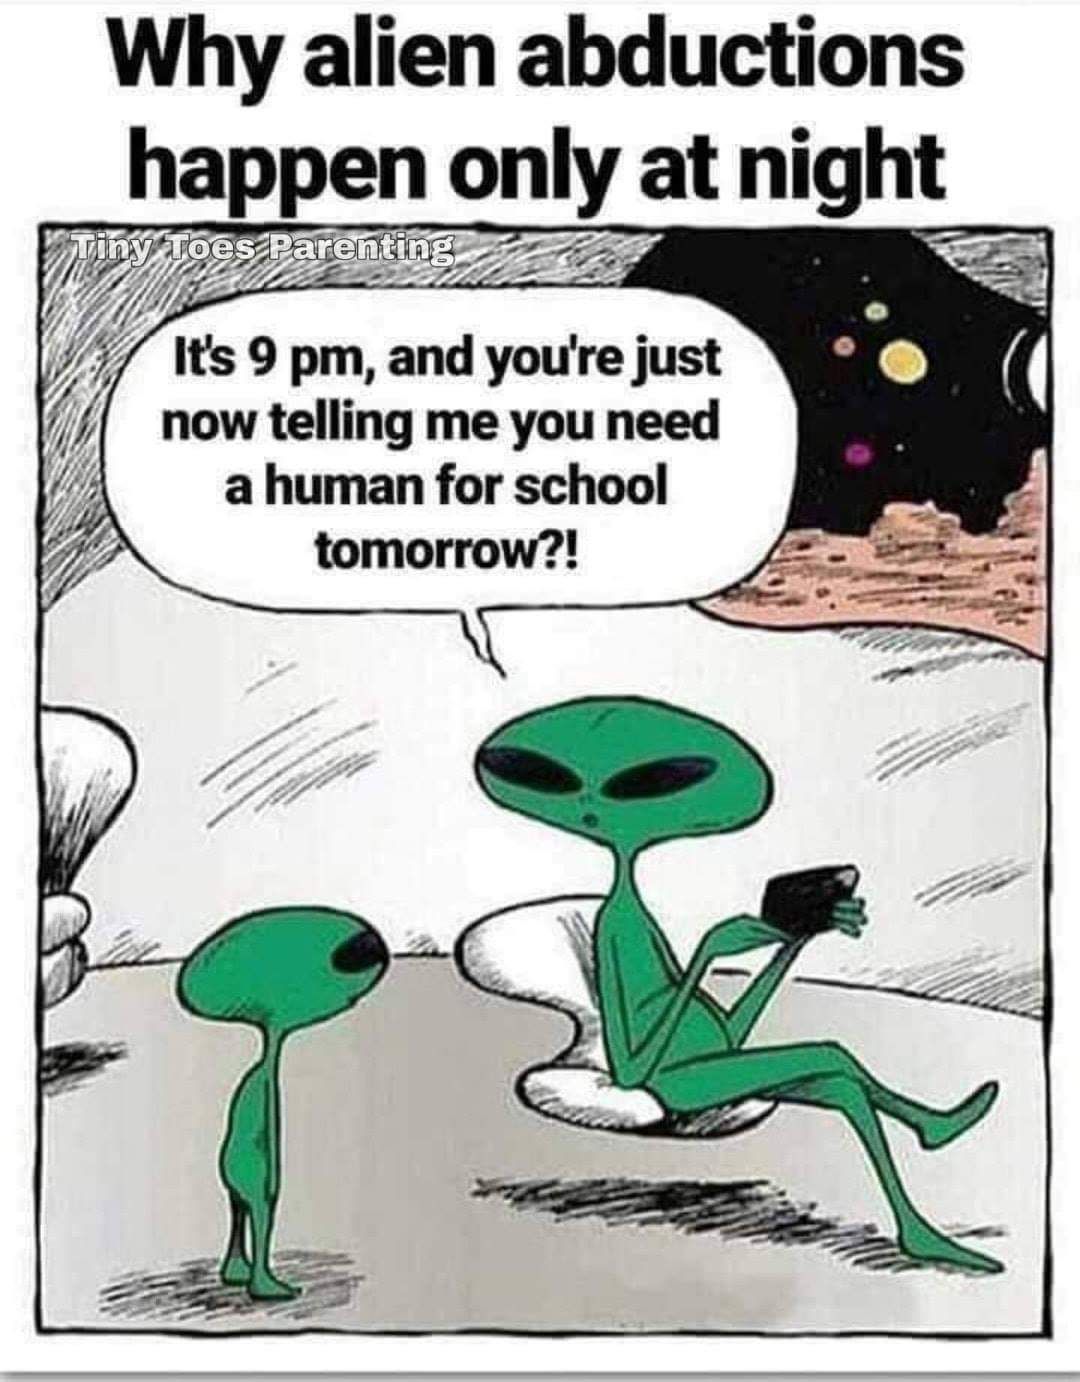 alien abductions only happen at night - Why alien abductions happen only at night Tiny Toes Parenting It's 9 pm, and you're just now telling me you need a human for school tomorrow?!